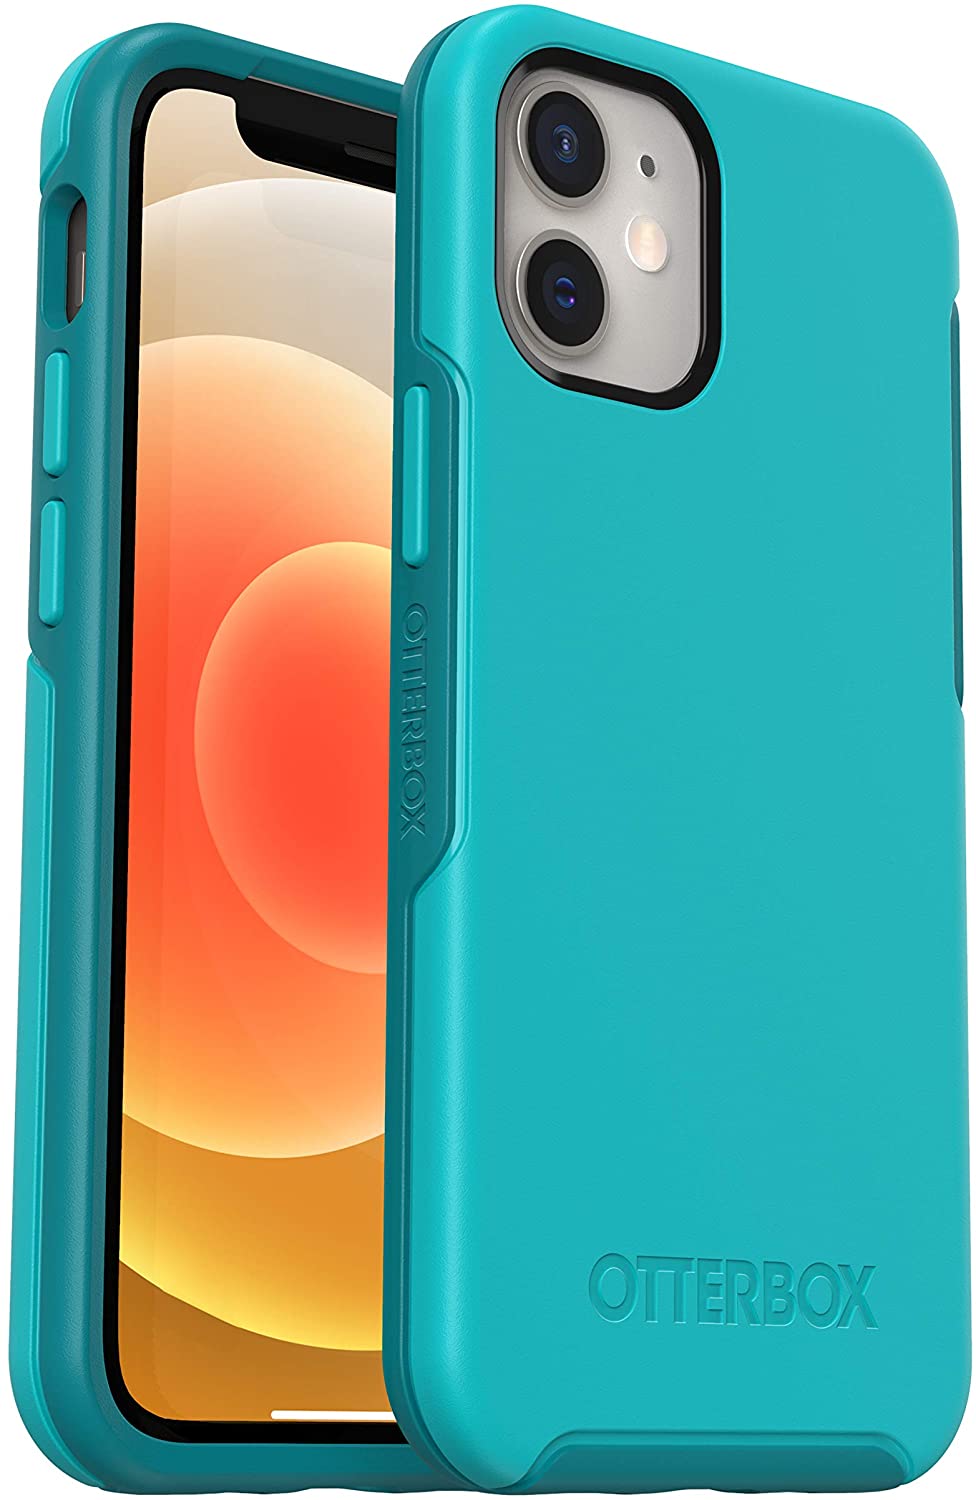 OtterBox SYMMETRY SERIES Case for Apple iPhone 12 Mini - Rock Candy (New)